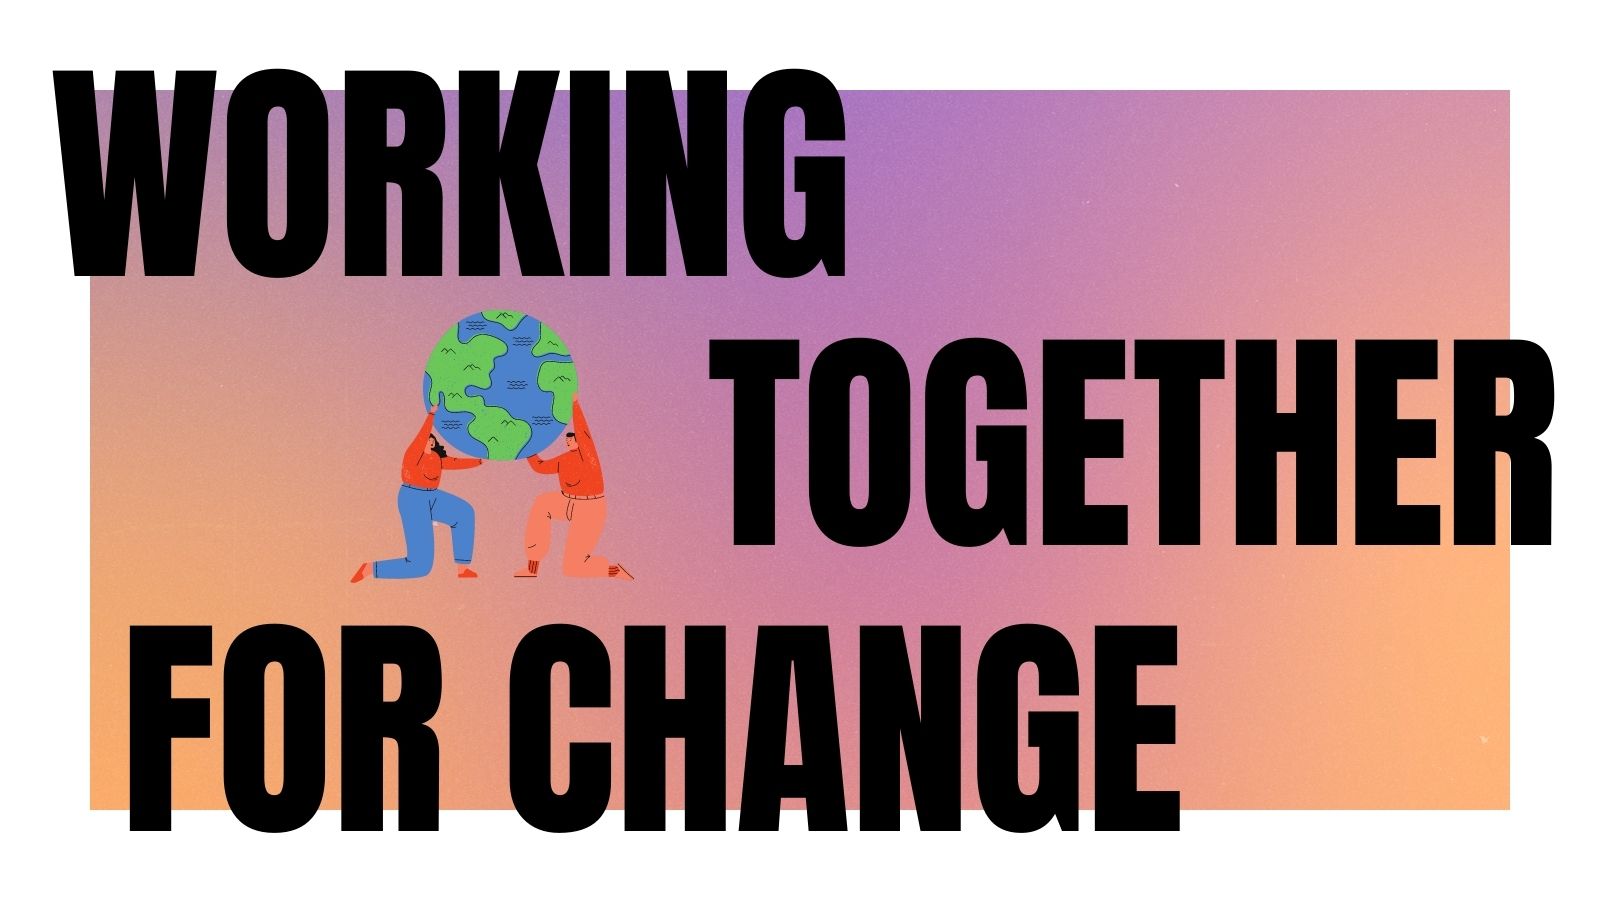 Working Together for Change Created by Jenny Vickers in Canva